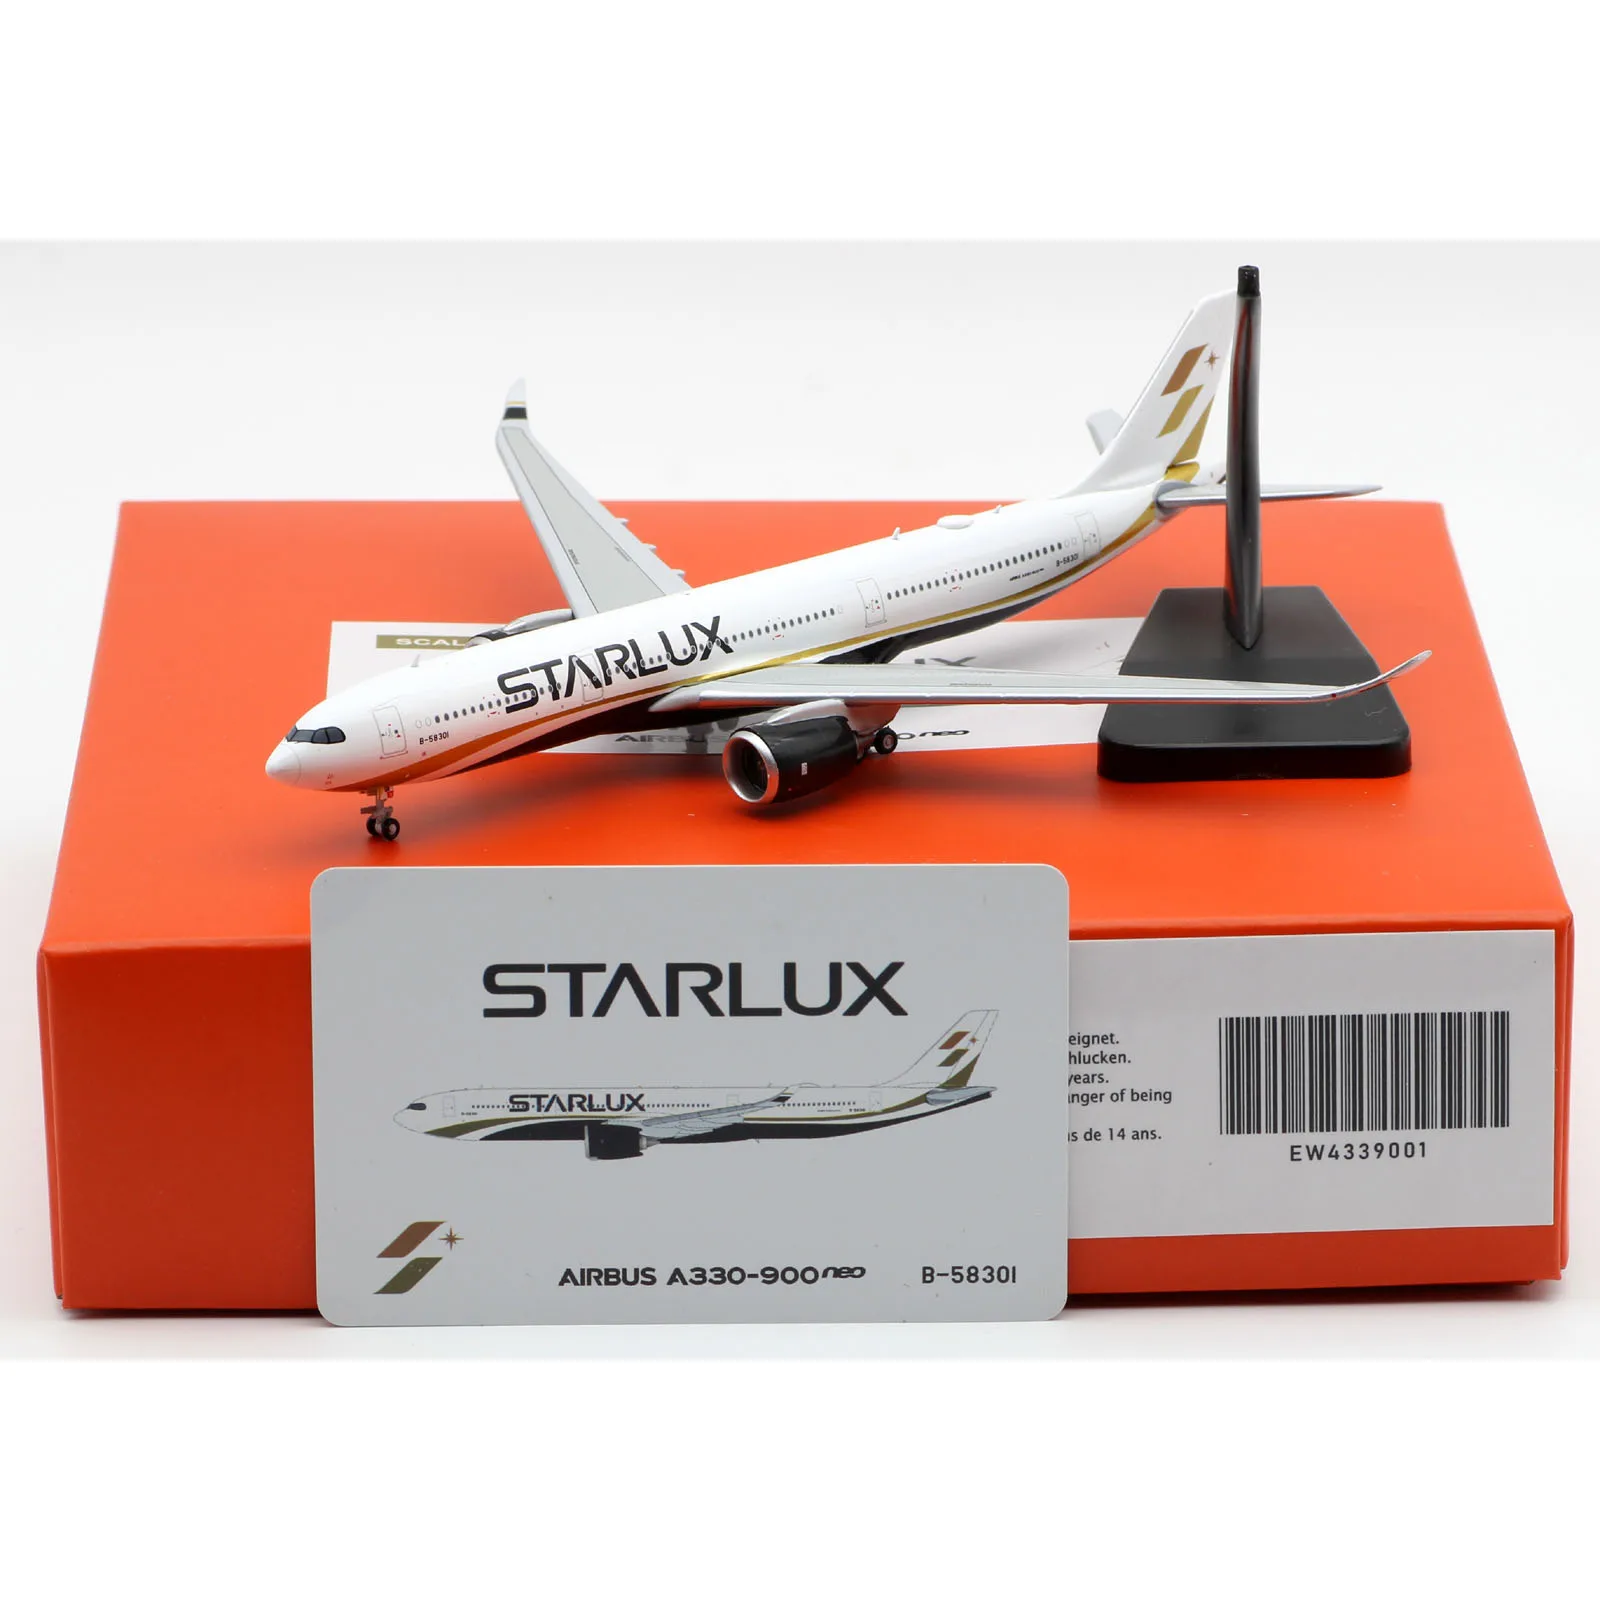 

EW4339001 Alloy Collectible Plane Gift JC Wings 1:400 Starlux Airlines Airbus A330-900NEO Diecast Aircraft Jet Model B-58301